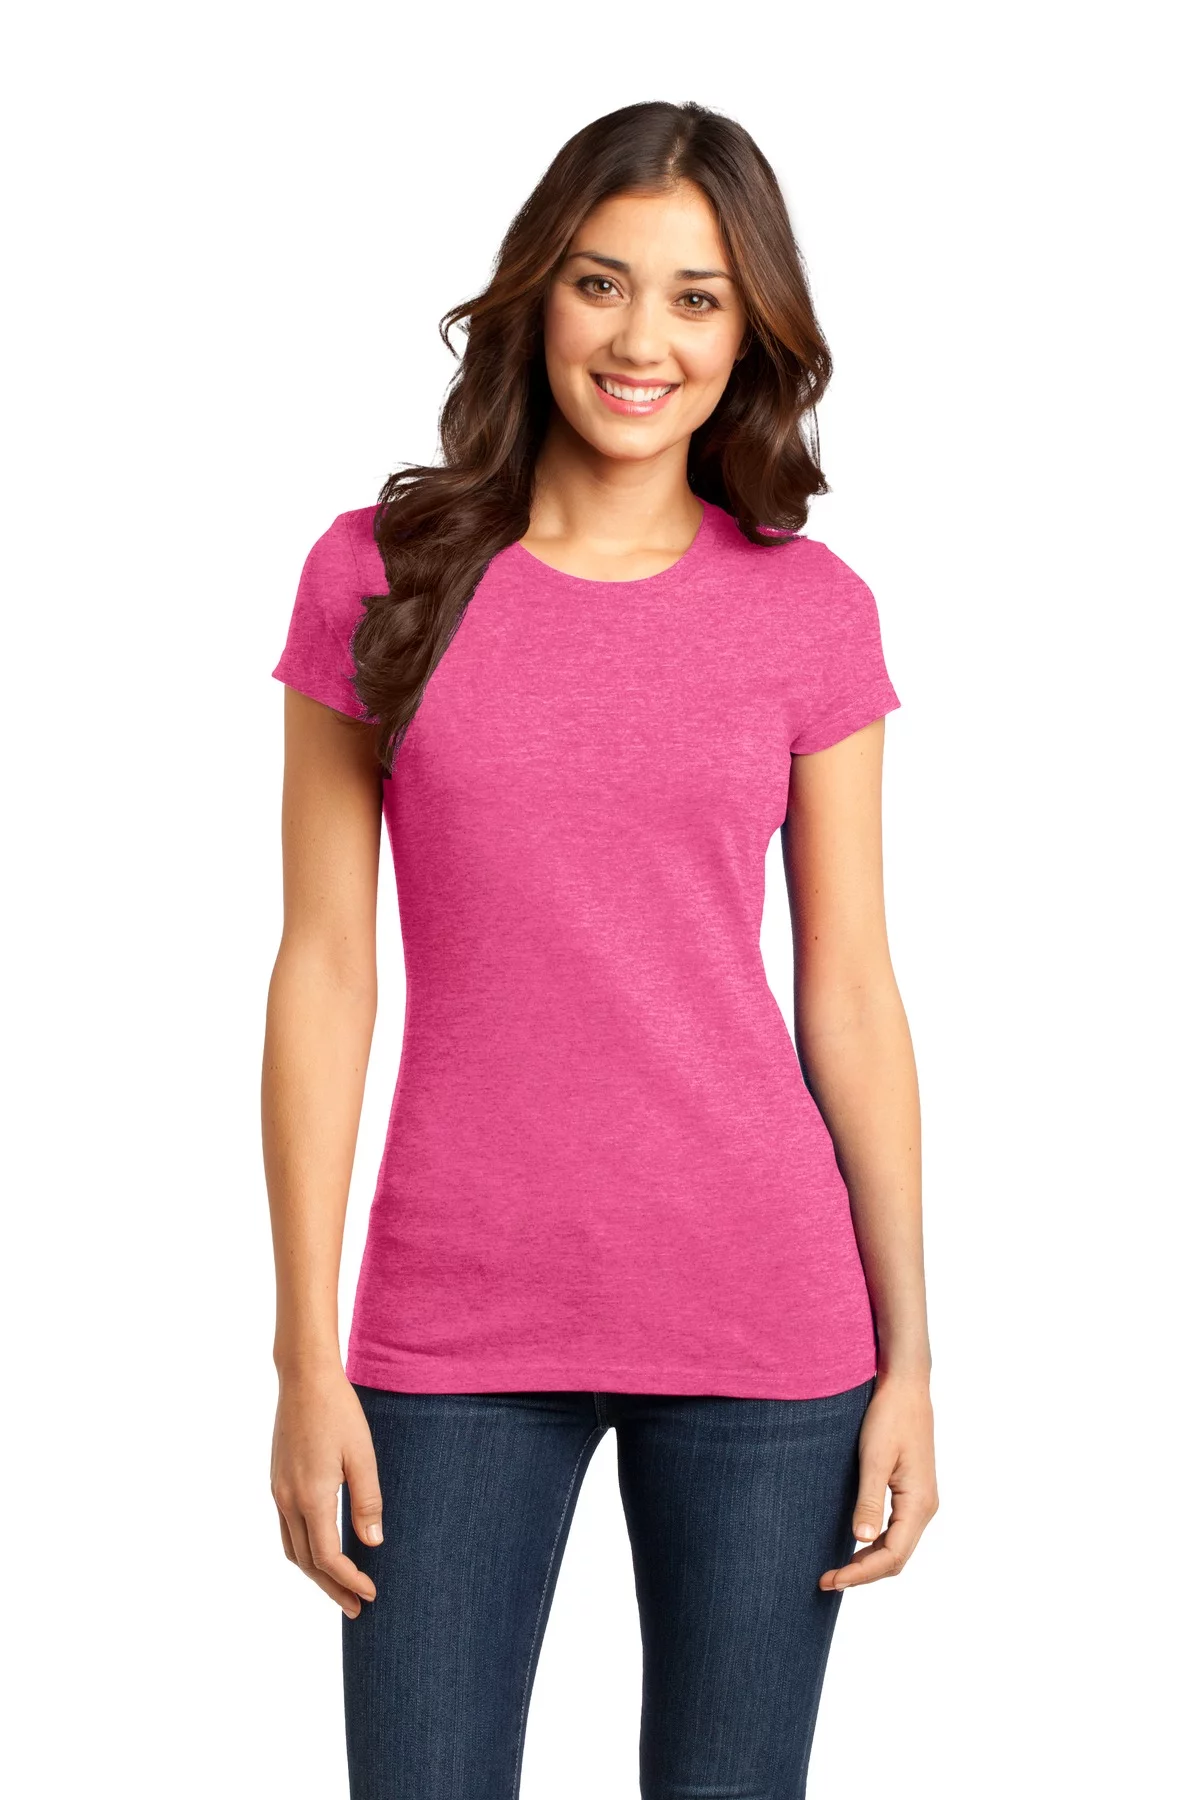 District DT6001 Juniors Very Important Tee , Fuchsia Frost, 4XL